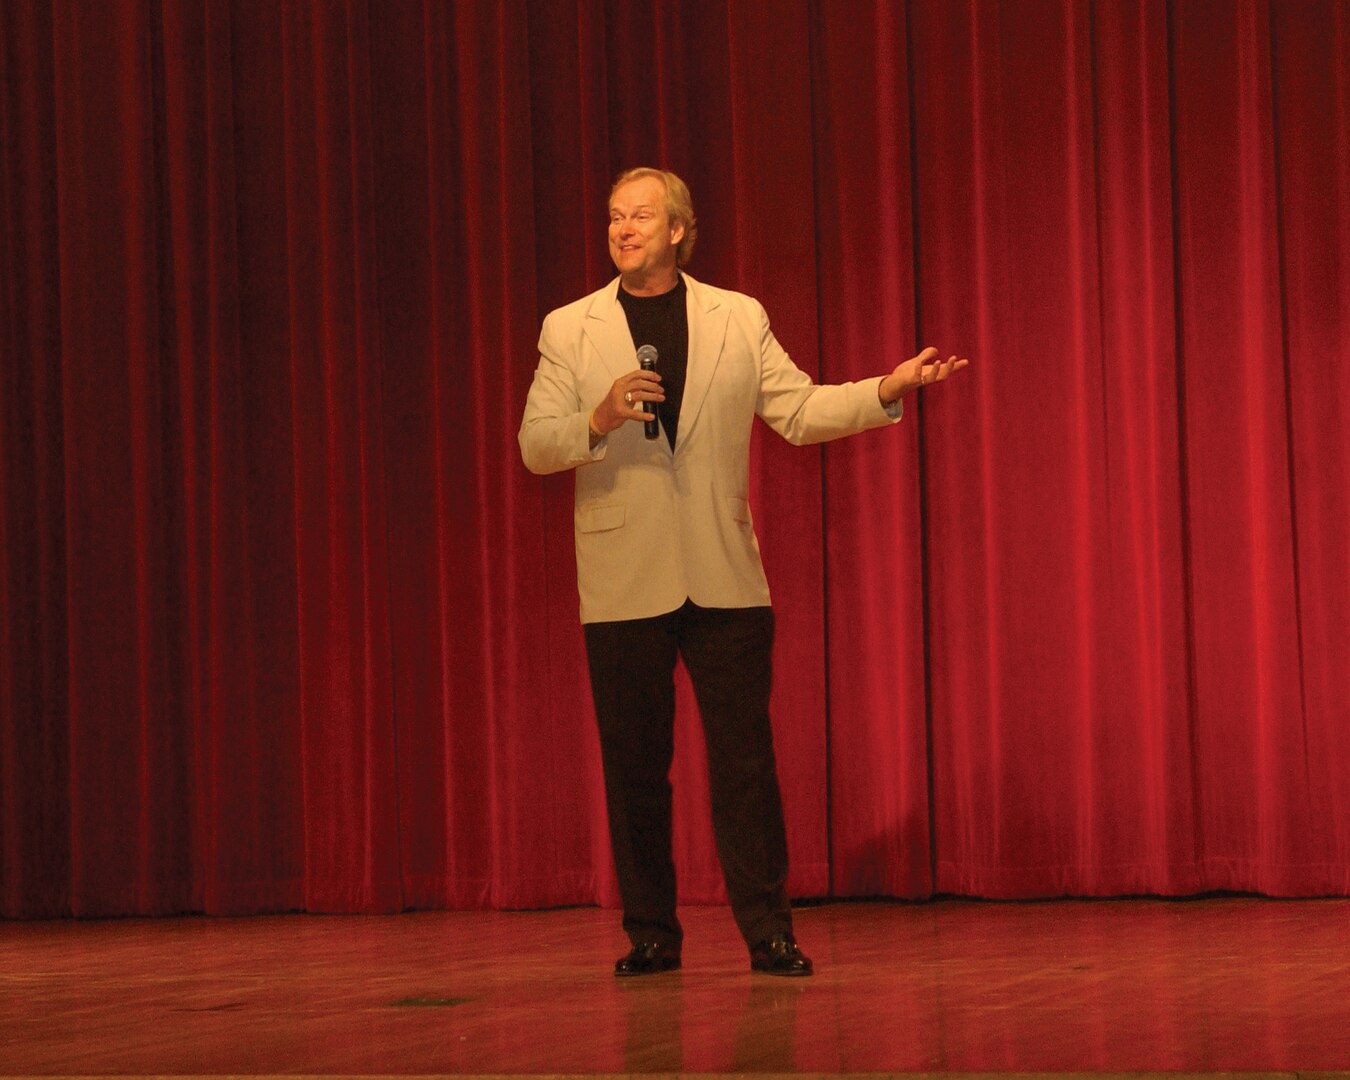 8/19/2008 - Dan Clark addresses members of Team Lackland in the Bob Hope Performing Arts Center Aug. 19. Mr. Clark is a motivational speaker who has spoken to military audiences all over the world. (USAF photo by Alan Boedeker)